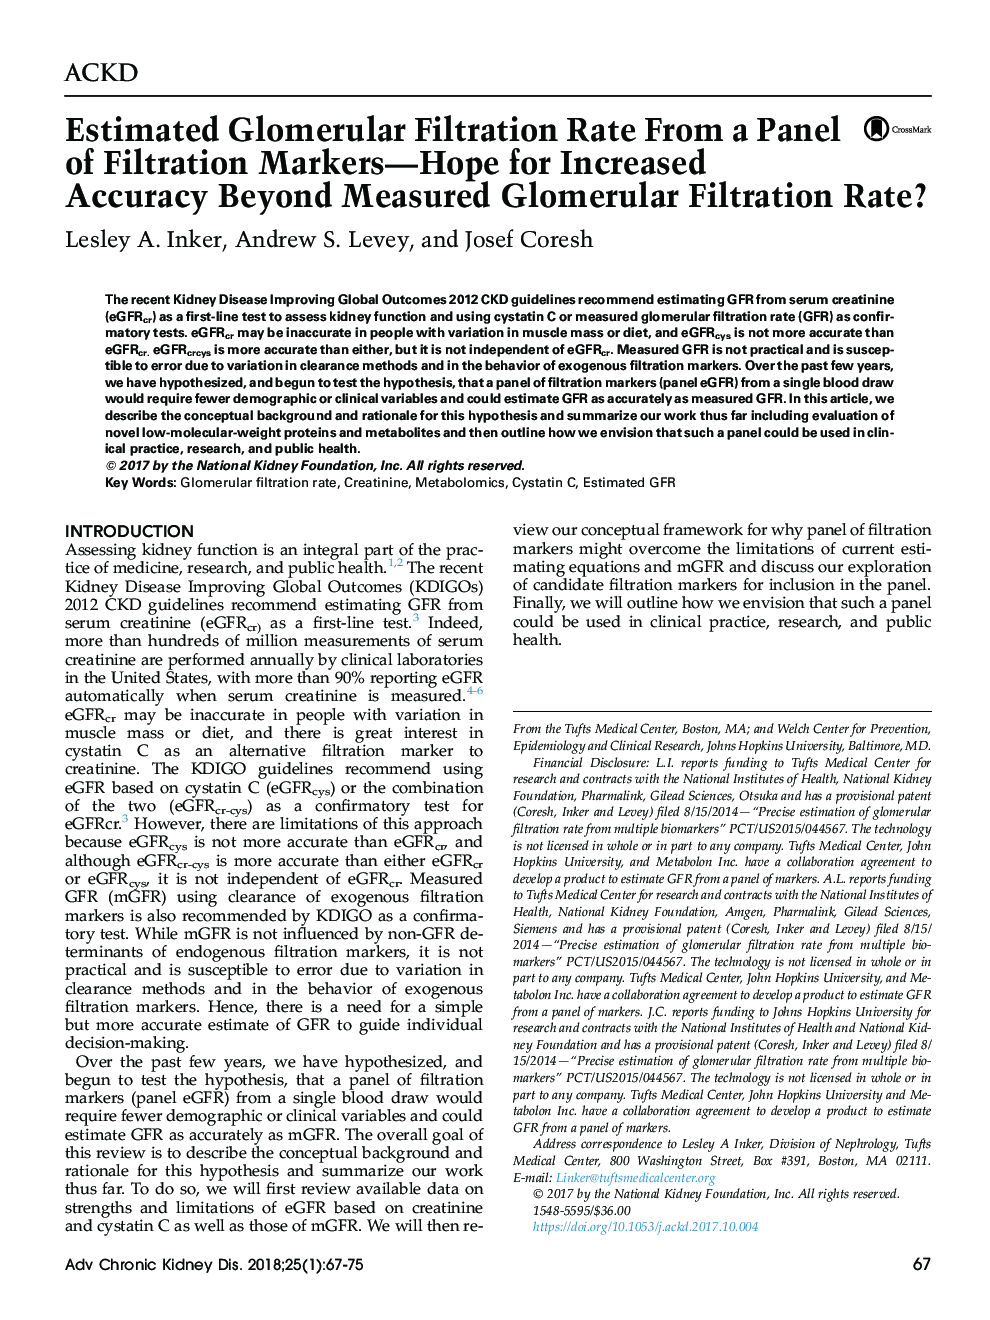 Estimated Glomerular Filtration Rate From a Panel of Filtration Markers-Hope for Increased Accuracy Beyond Measured Glomerular Filtration Rate?